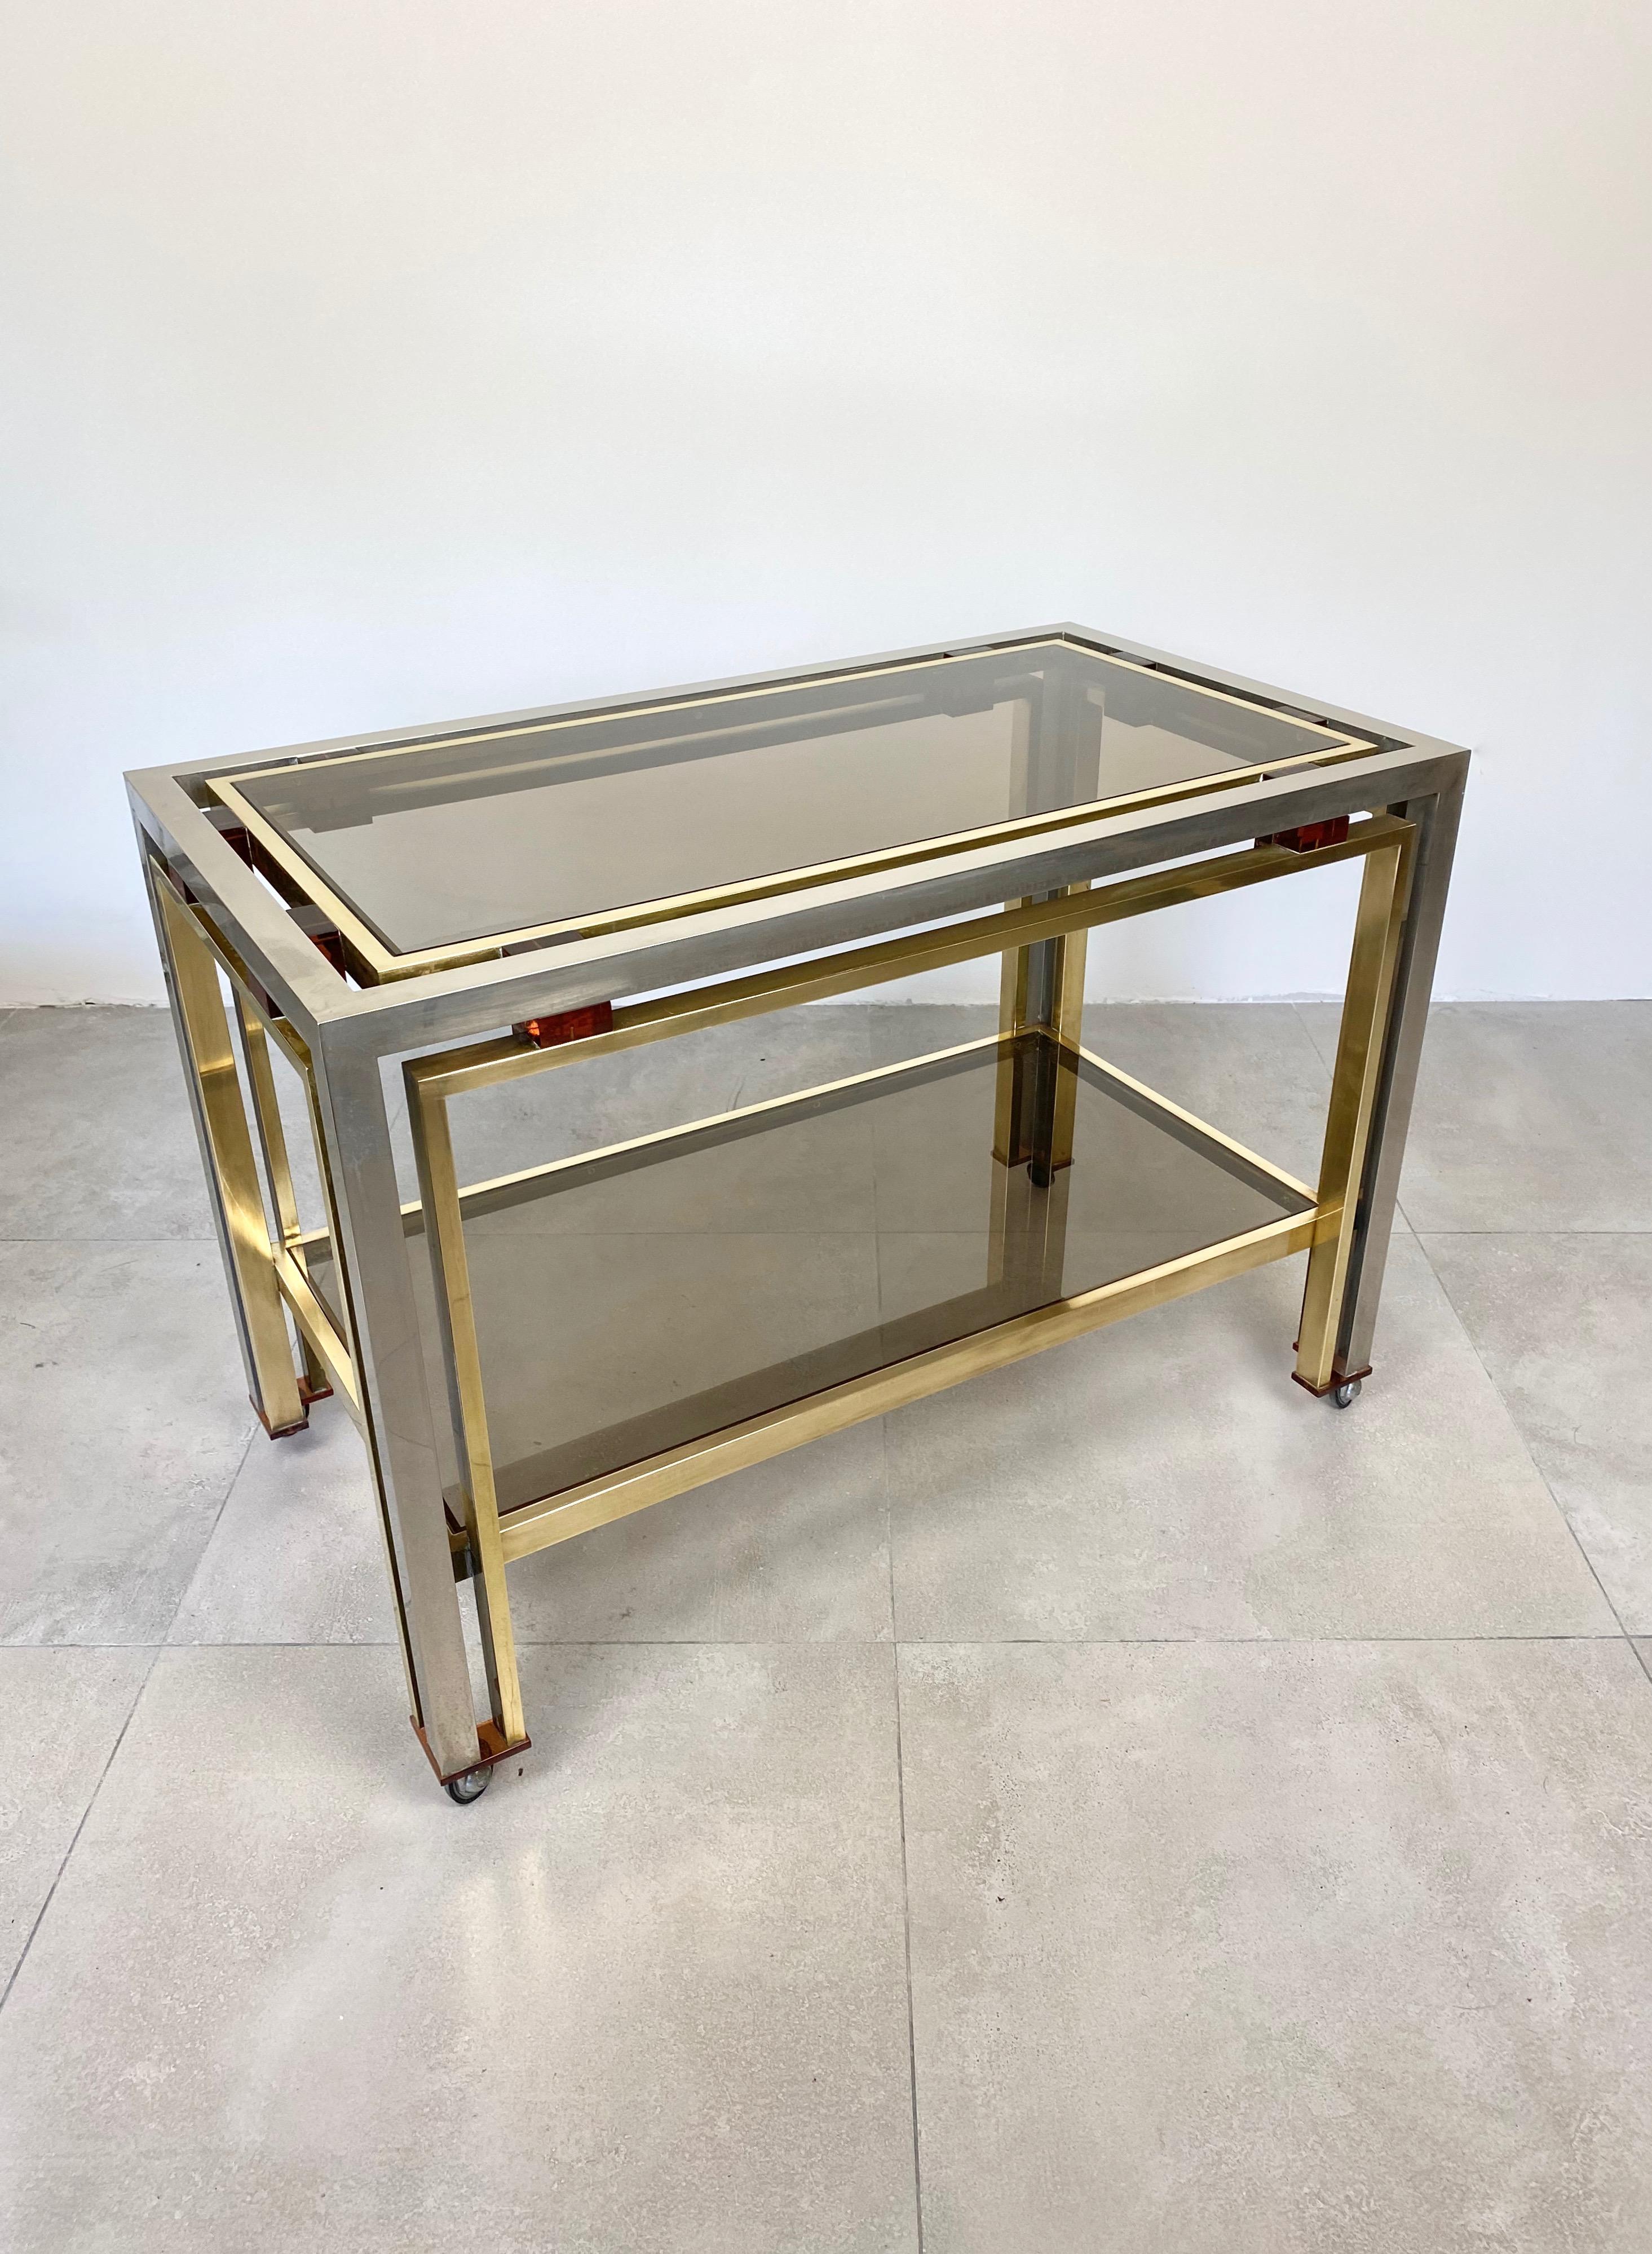 Cart table in chrome, Lucite and brass with a smoked glass surface by the Italian designer Romeo Rega, Italy, 1970s.